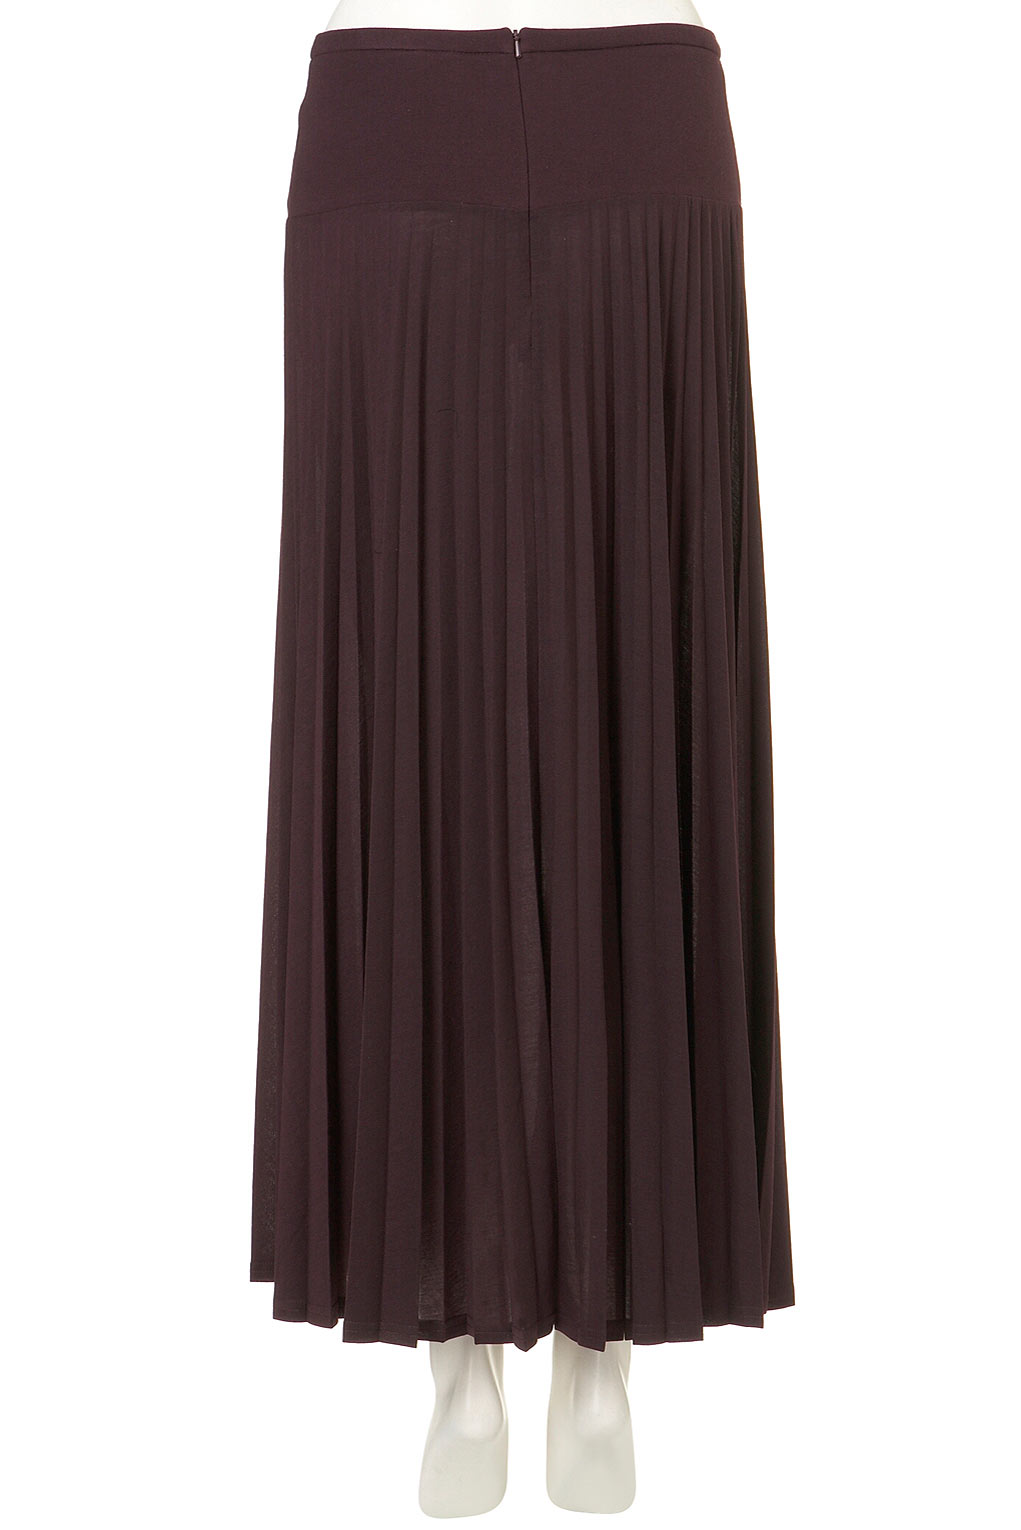 Lyst - Topshop High Waist Pleat Maxi Skirt in Red